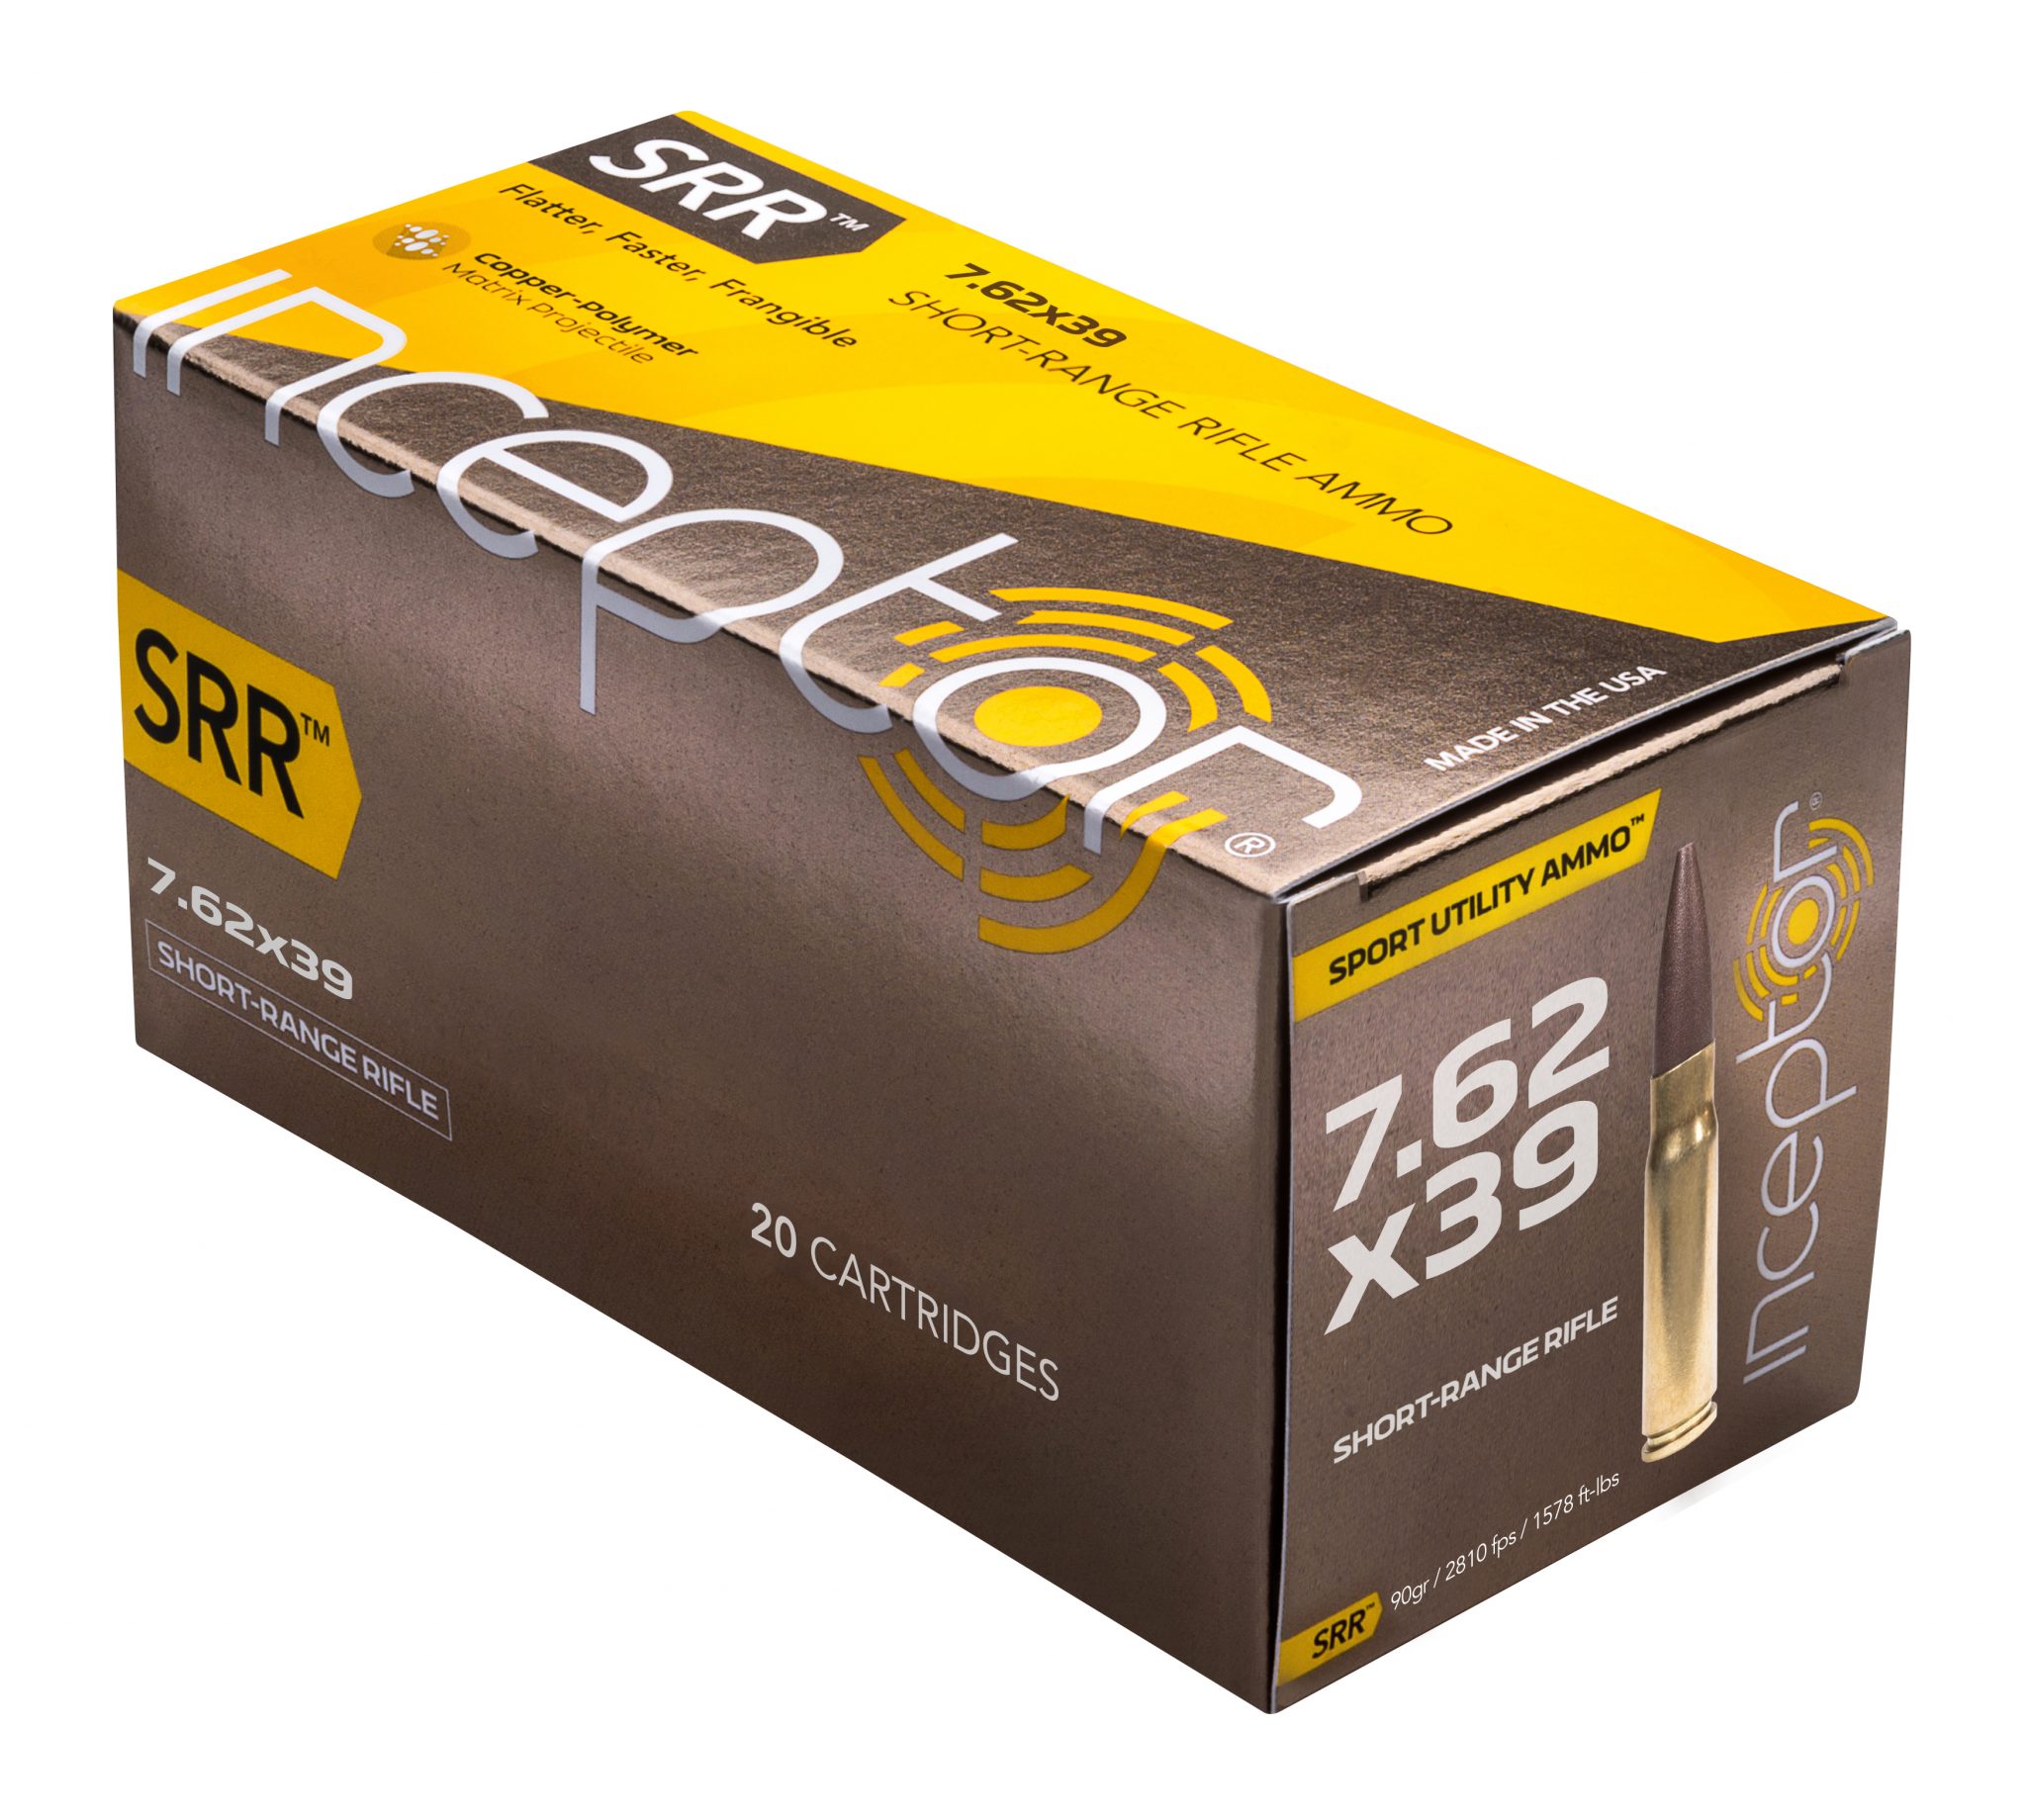 Inceptor® Ammunition Adds 7.62x39mm and 223 Rem to Short-Range Rifle (SRR) Product Line in 2018